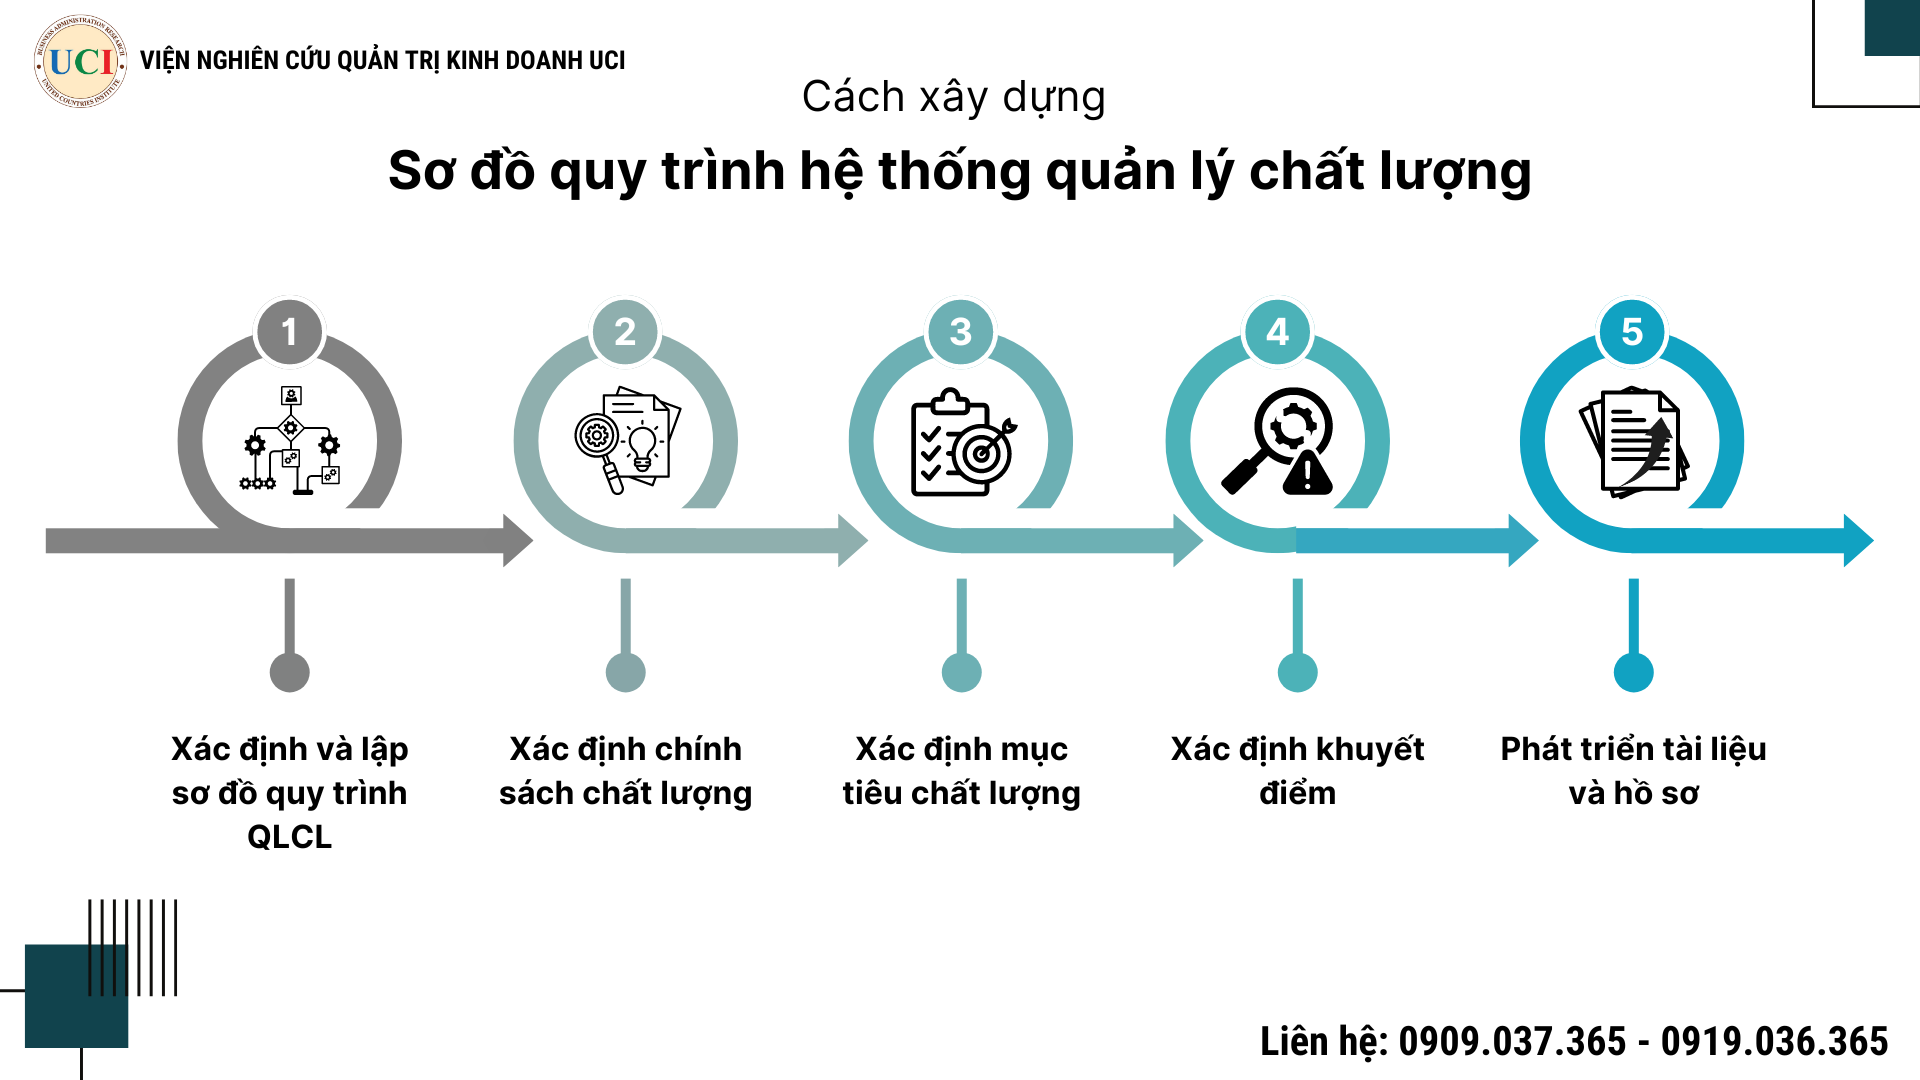 so-do-quy-trinh-he-thong-qlcl-1_2-png.54282